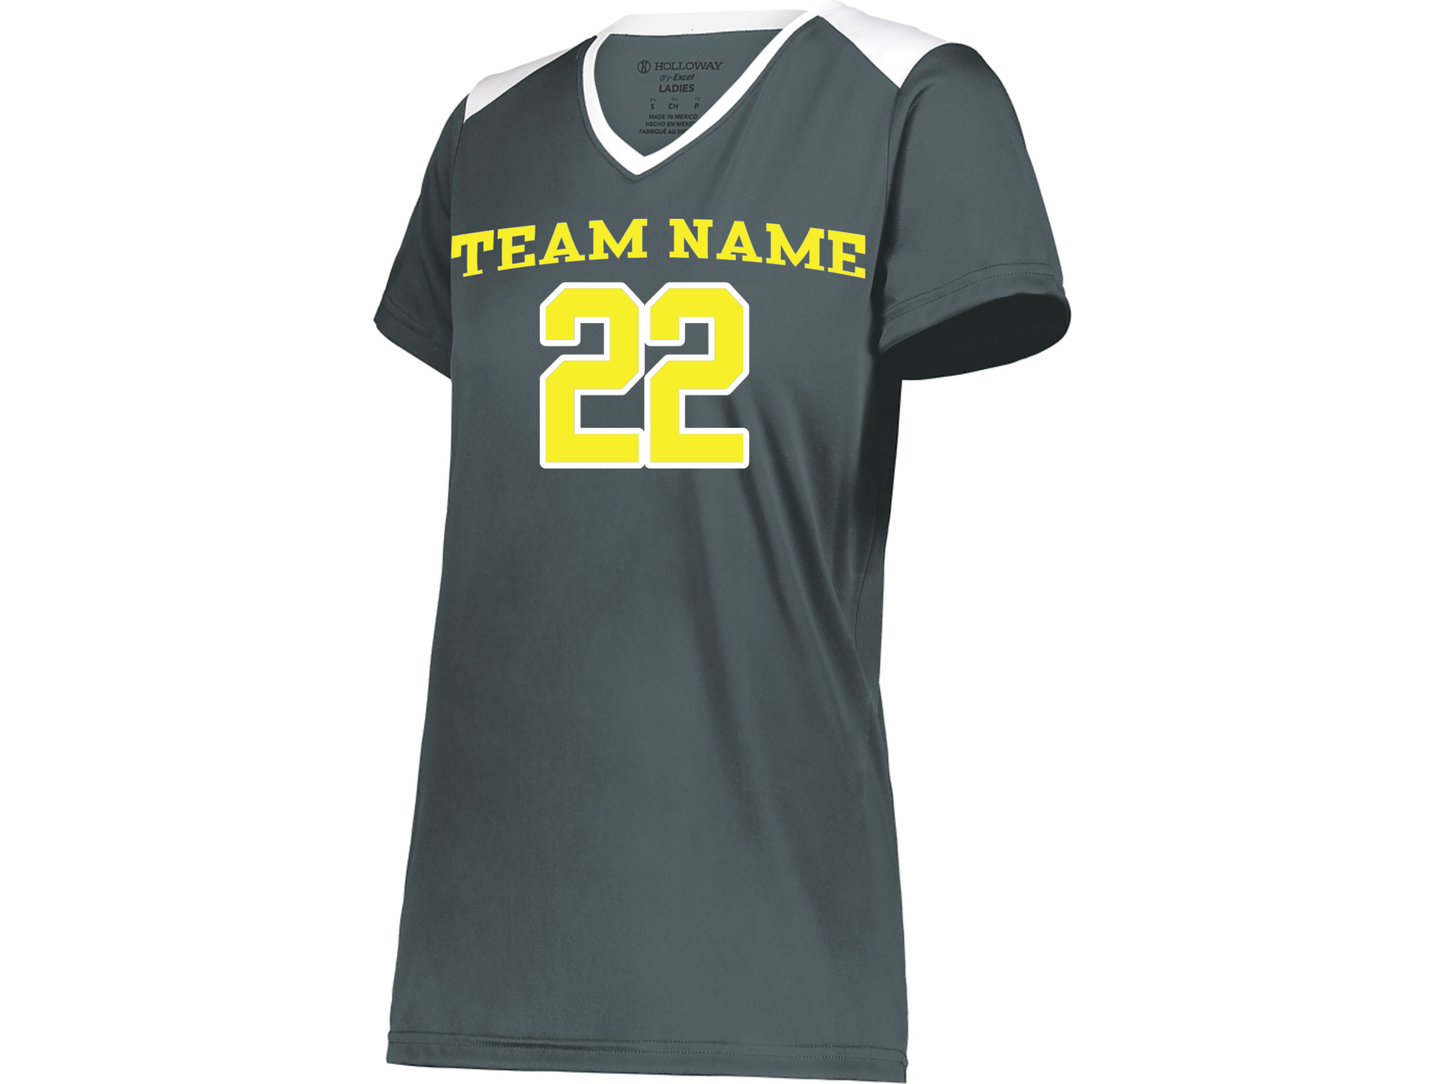 Custom Momentum Team Tees Crew Neck for Men and V-Neck for Women, Text and/or Image